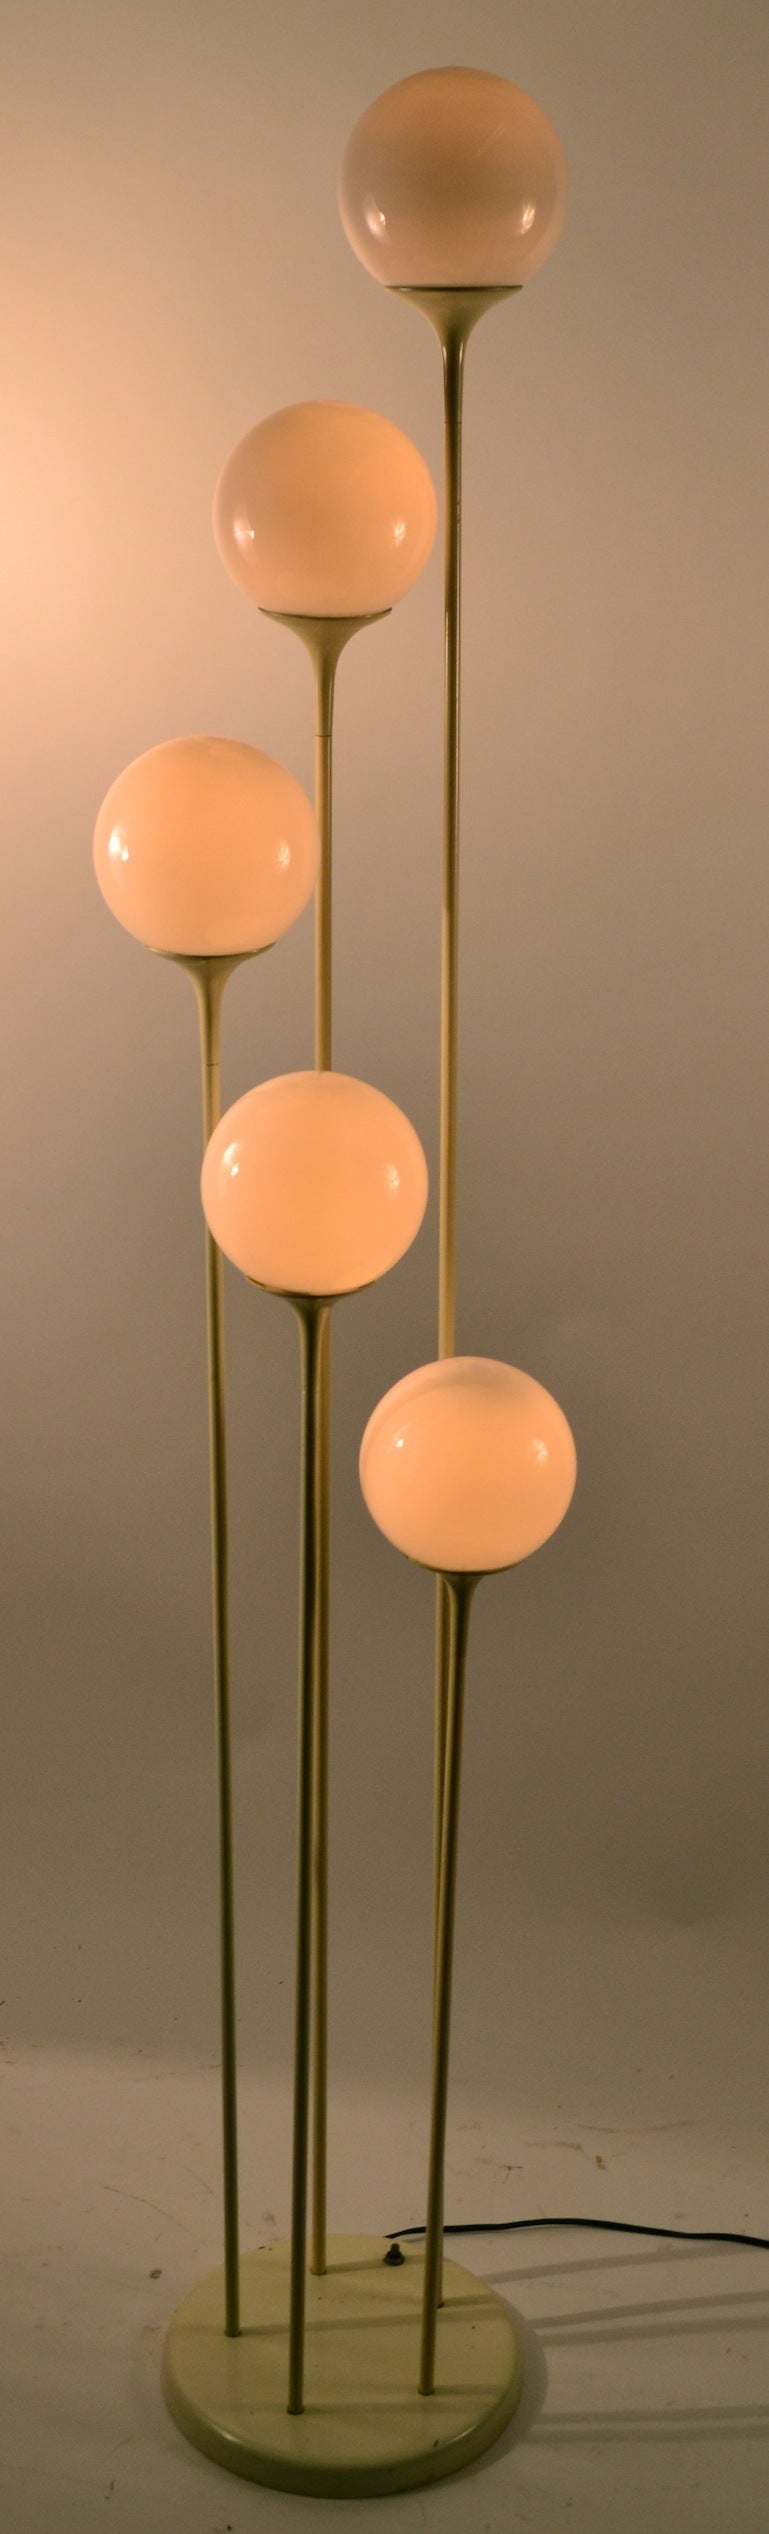 Five glass ball globes each mounted on free standing trumpet form posts. Saarinen influence design, probably by Lightolier.